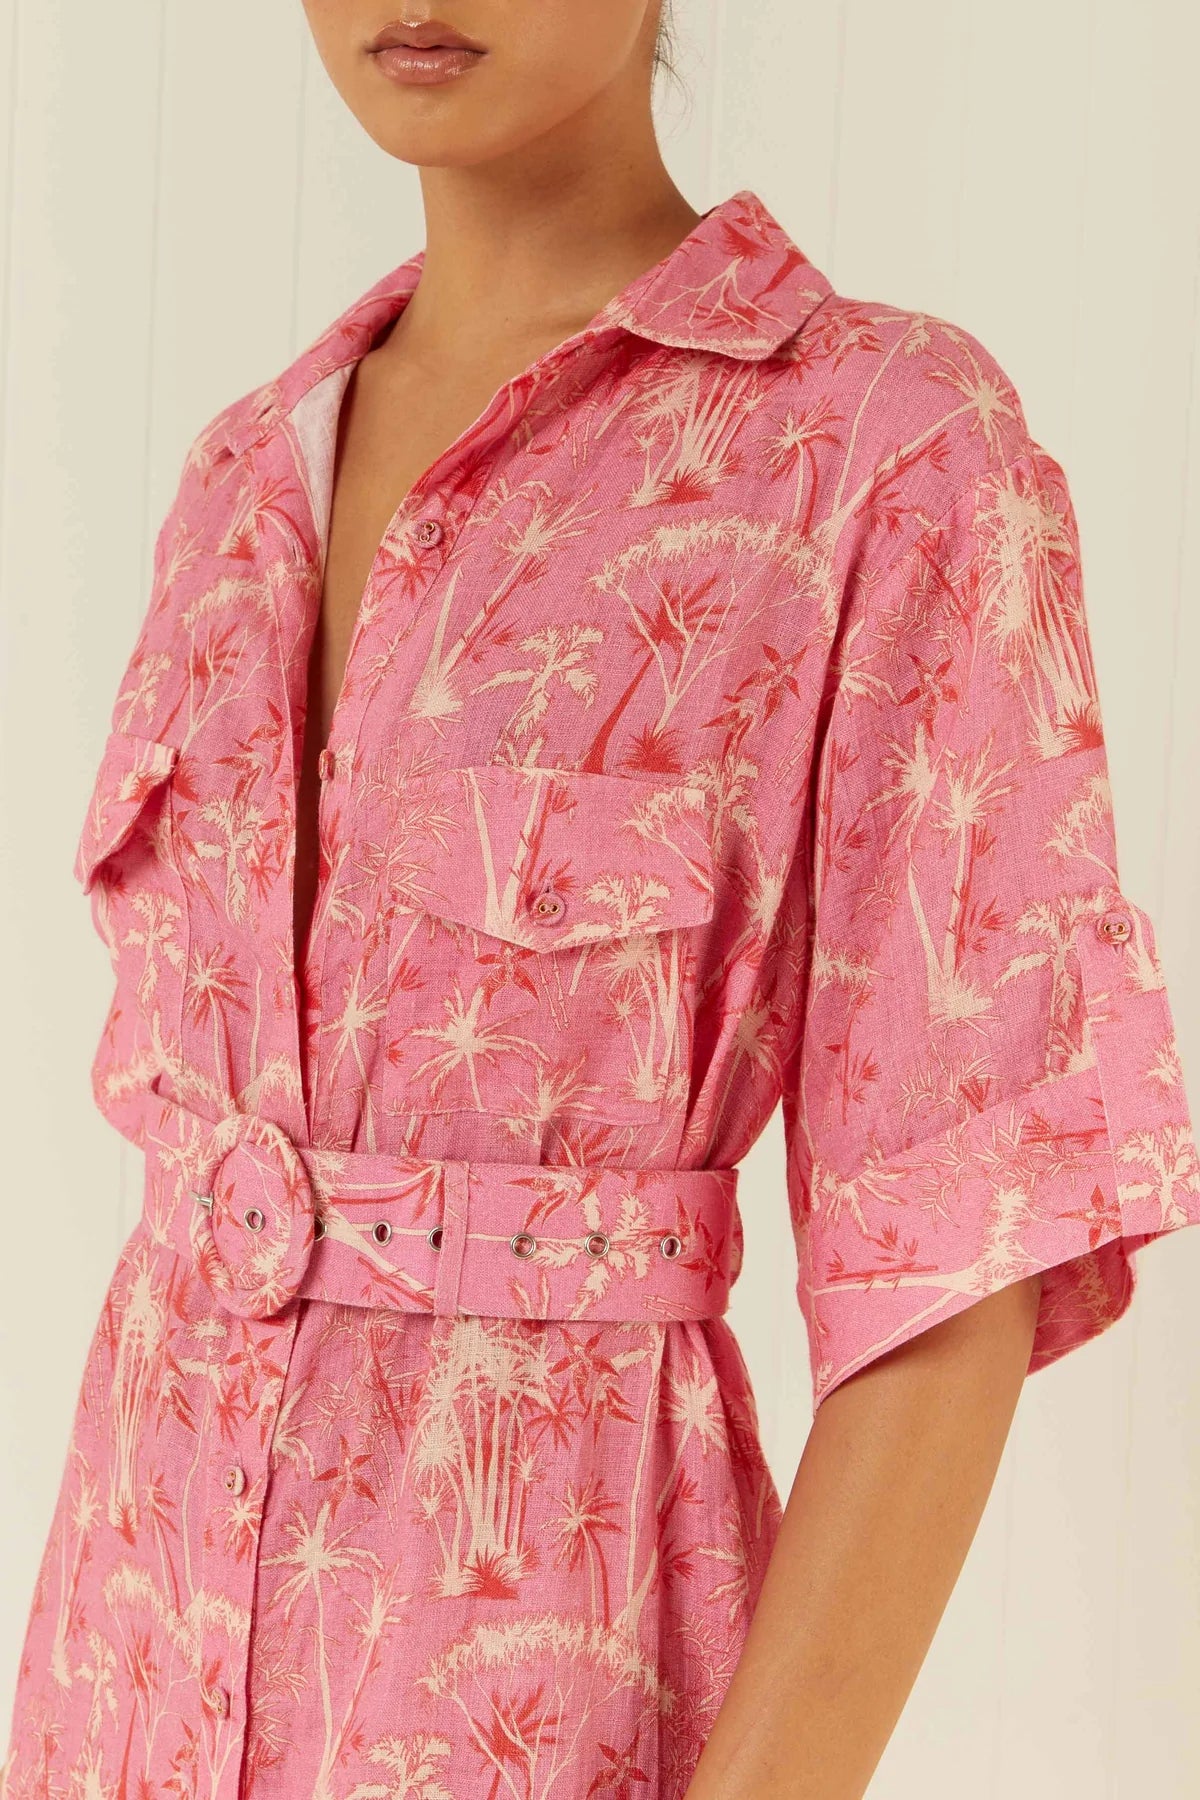 Palm tree print shirt dress in pinks and reds with short sleeves close up